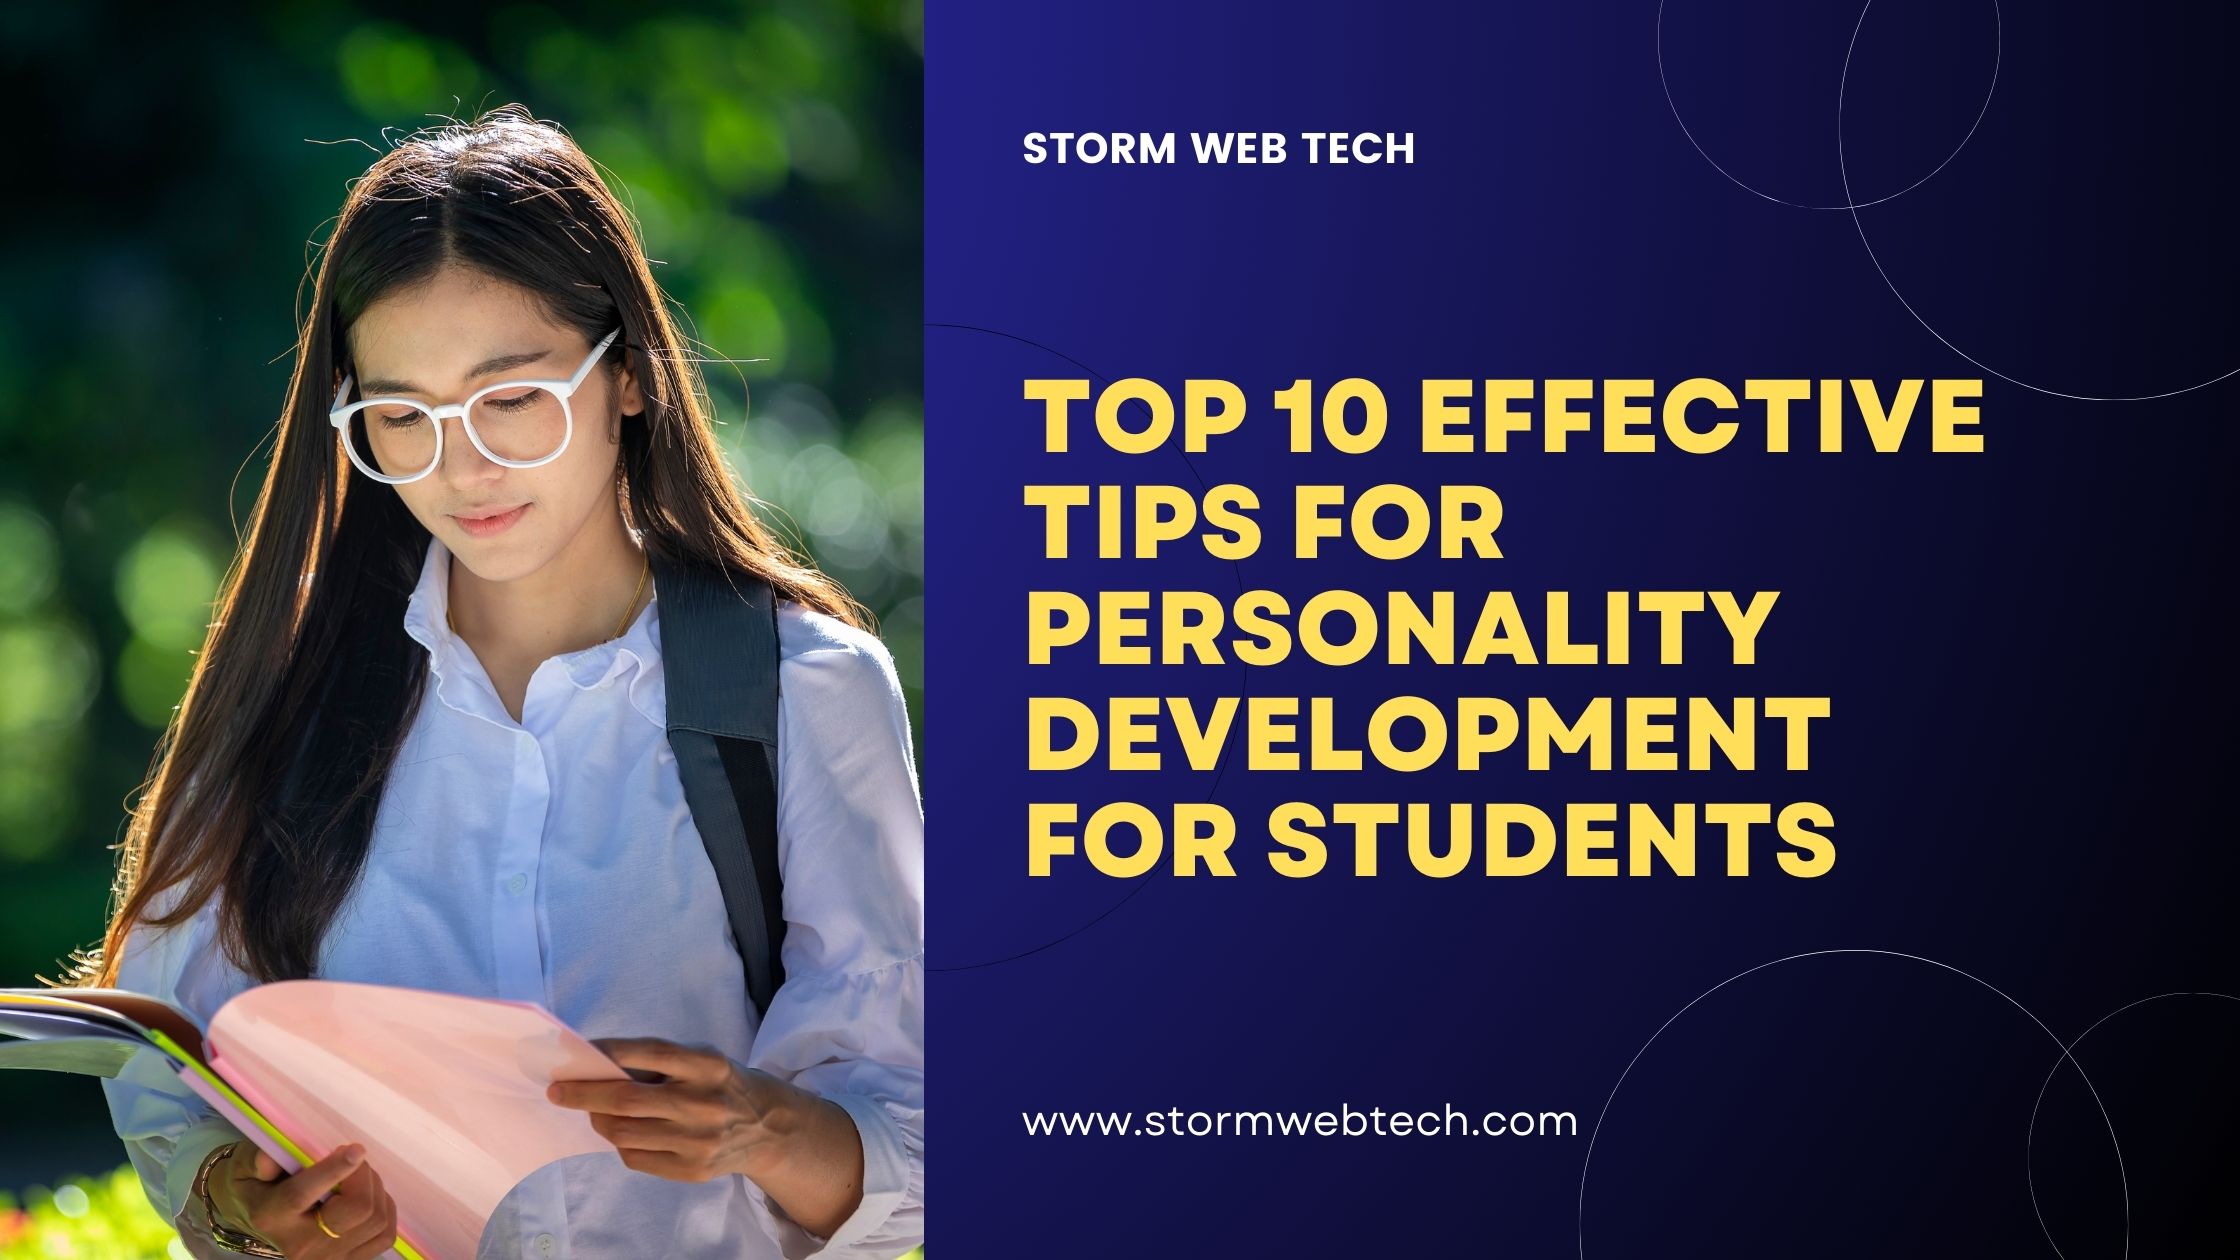 Top 10 Effective Tips for Personality Development for Students that can aid students in enhancing their personality and overall development